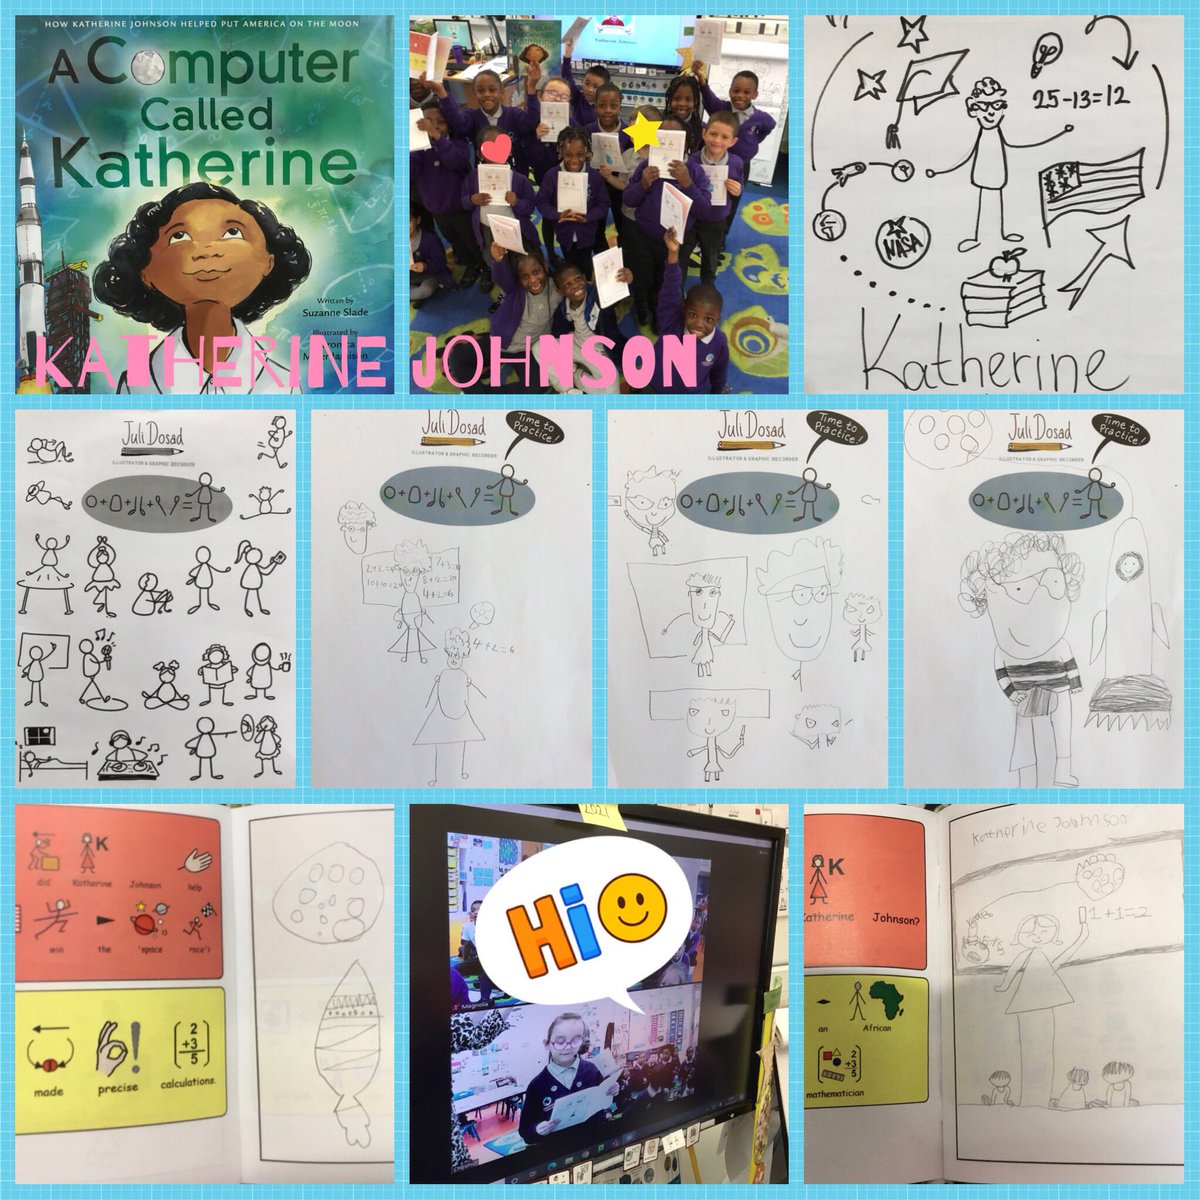 Year 1 Chestnut class have loved learning about Katherine Johnson. Today we used the amazing resources illustrator @julidosad had made for Tidemill and illustrated our own books about the amazing mathematician Katherine Johnson! We shared what we had learnt with Magnolia class.LH